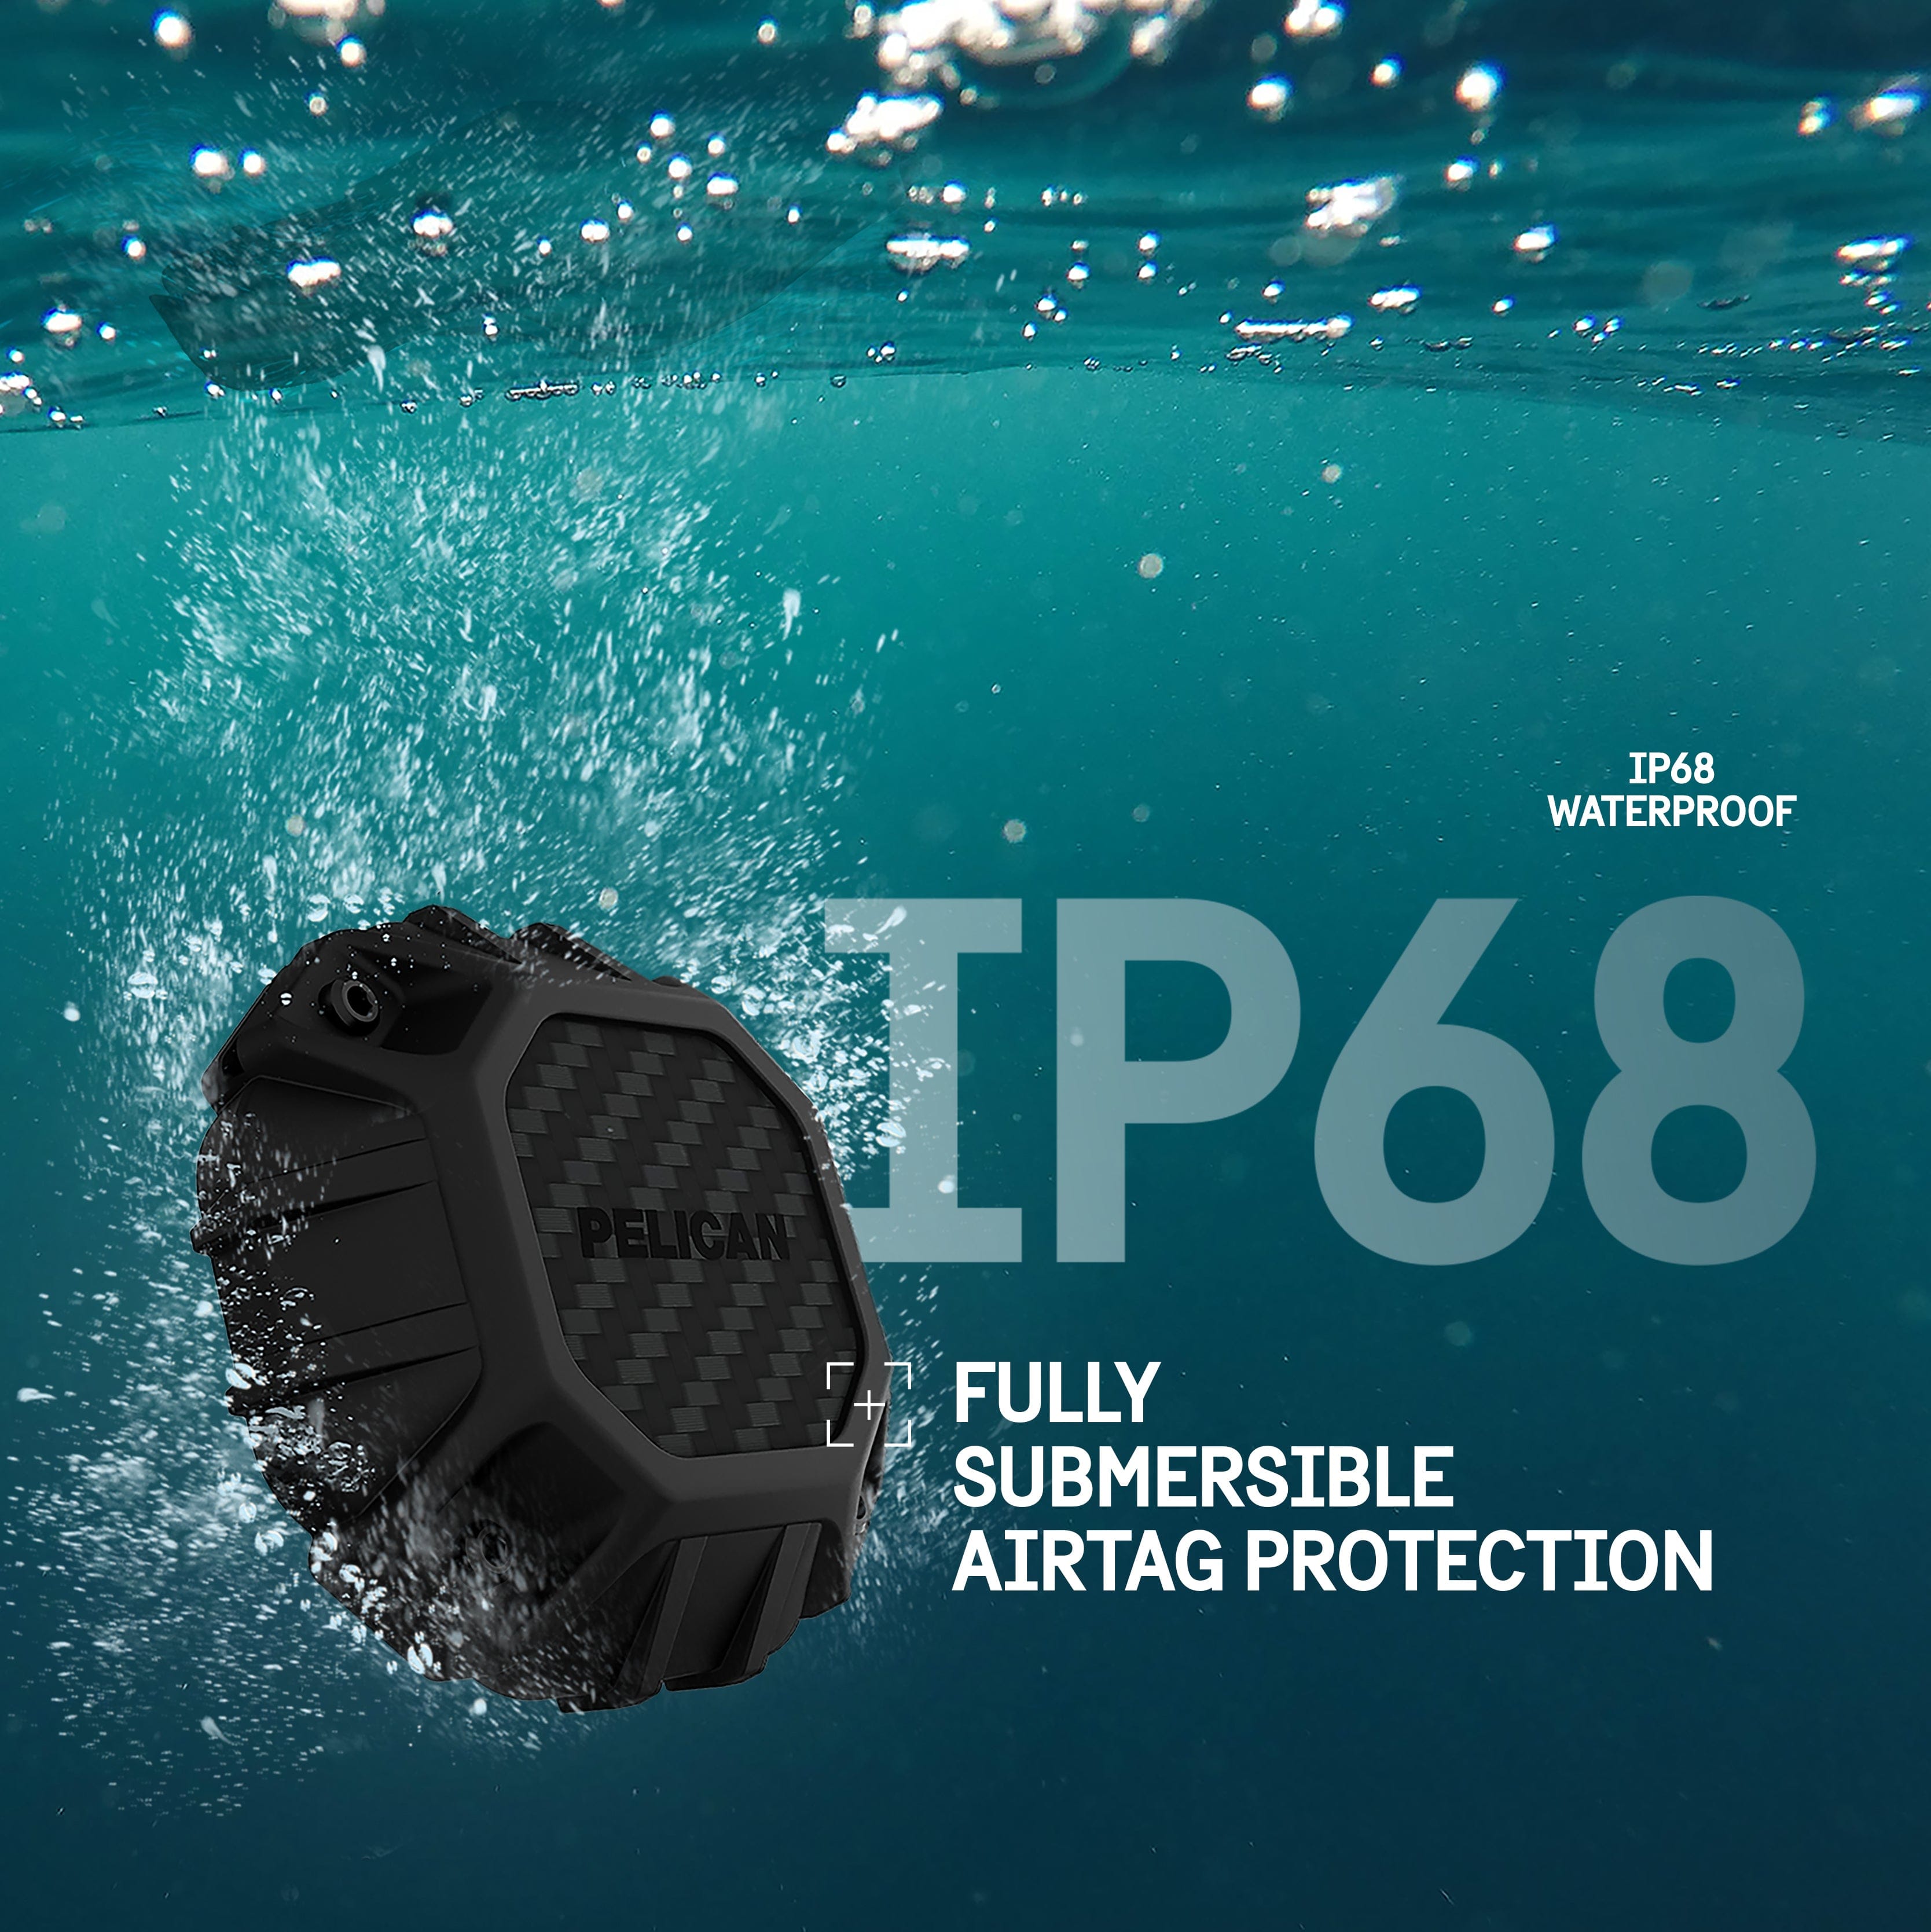 IP68 WATERPROOF. FULLY SUBMERSIBLE AIRTAG PROTECTION.